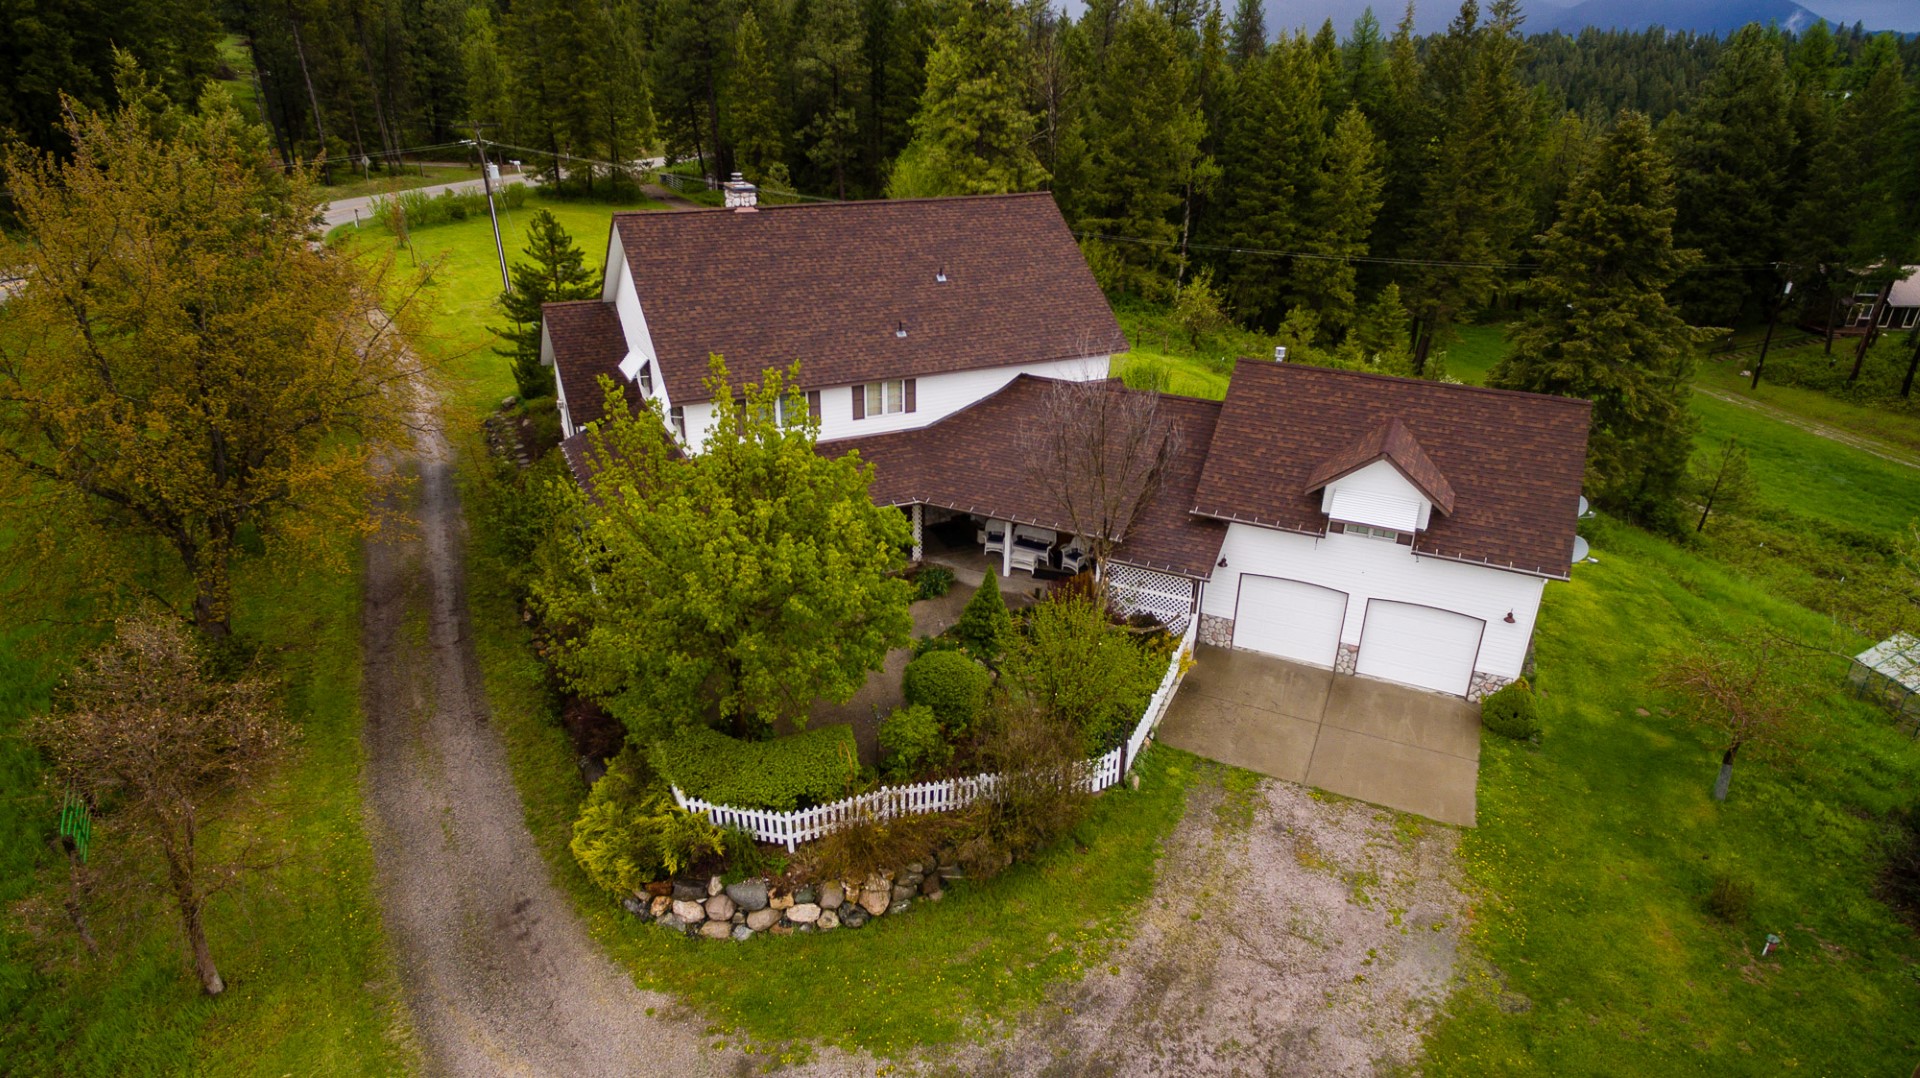 Chewelah Washington Drone Photography and Video for Real Estate